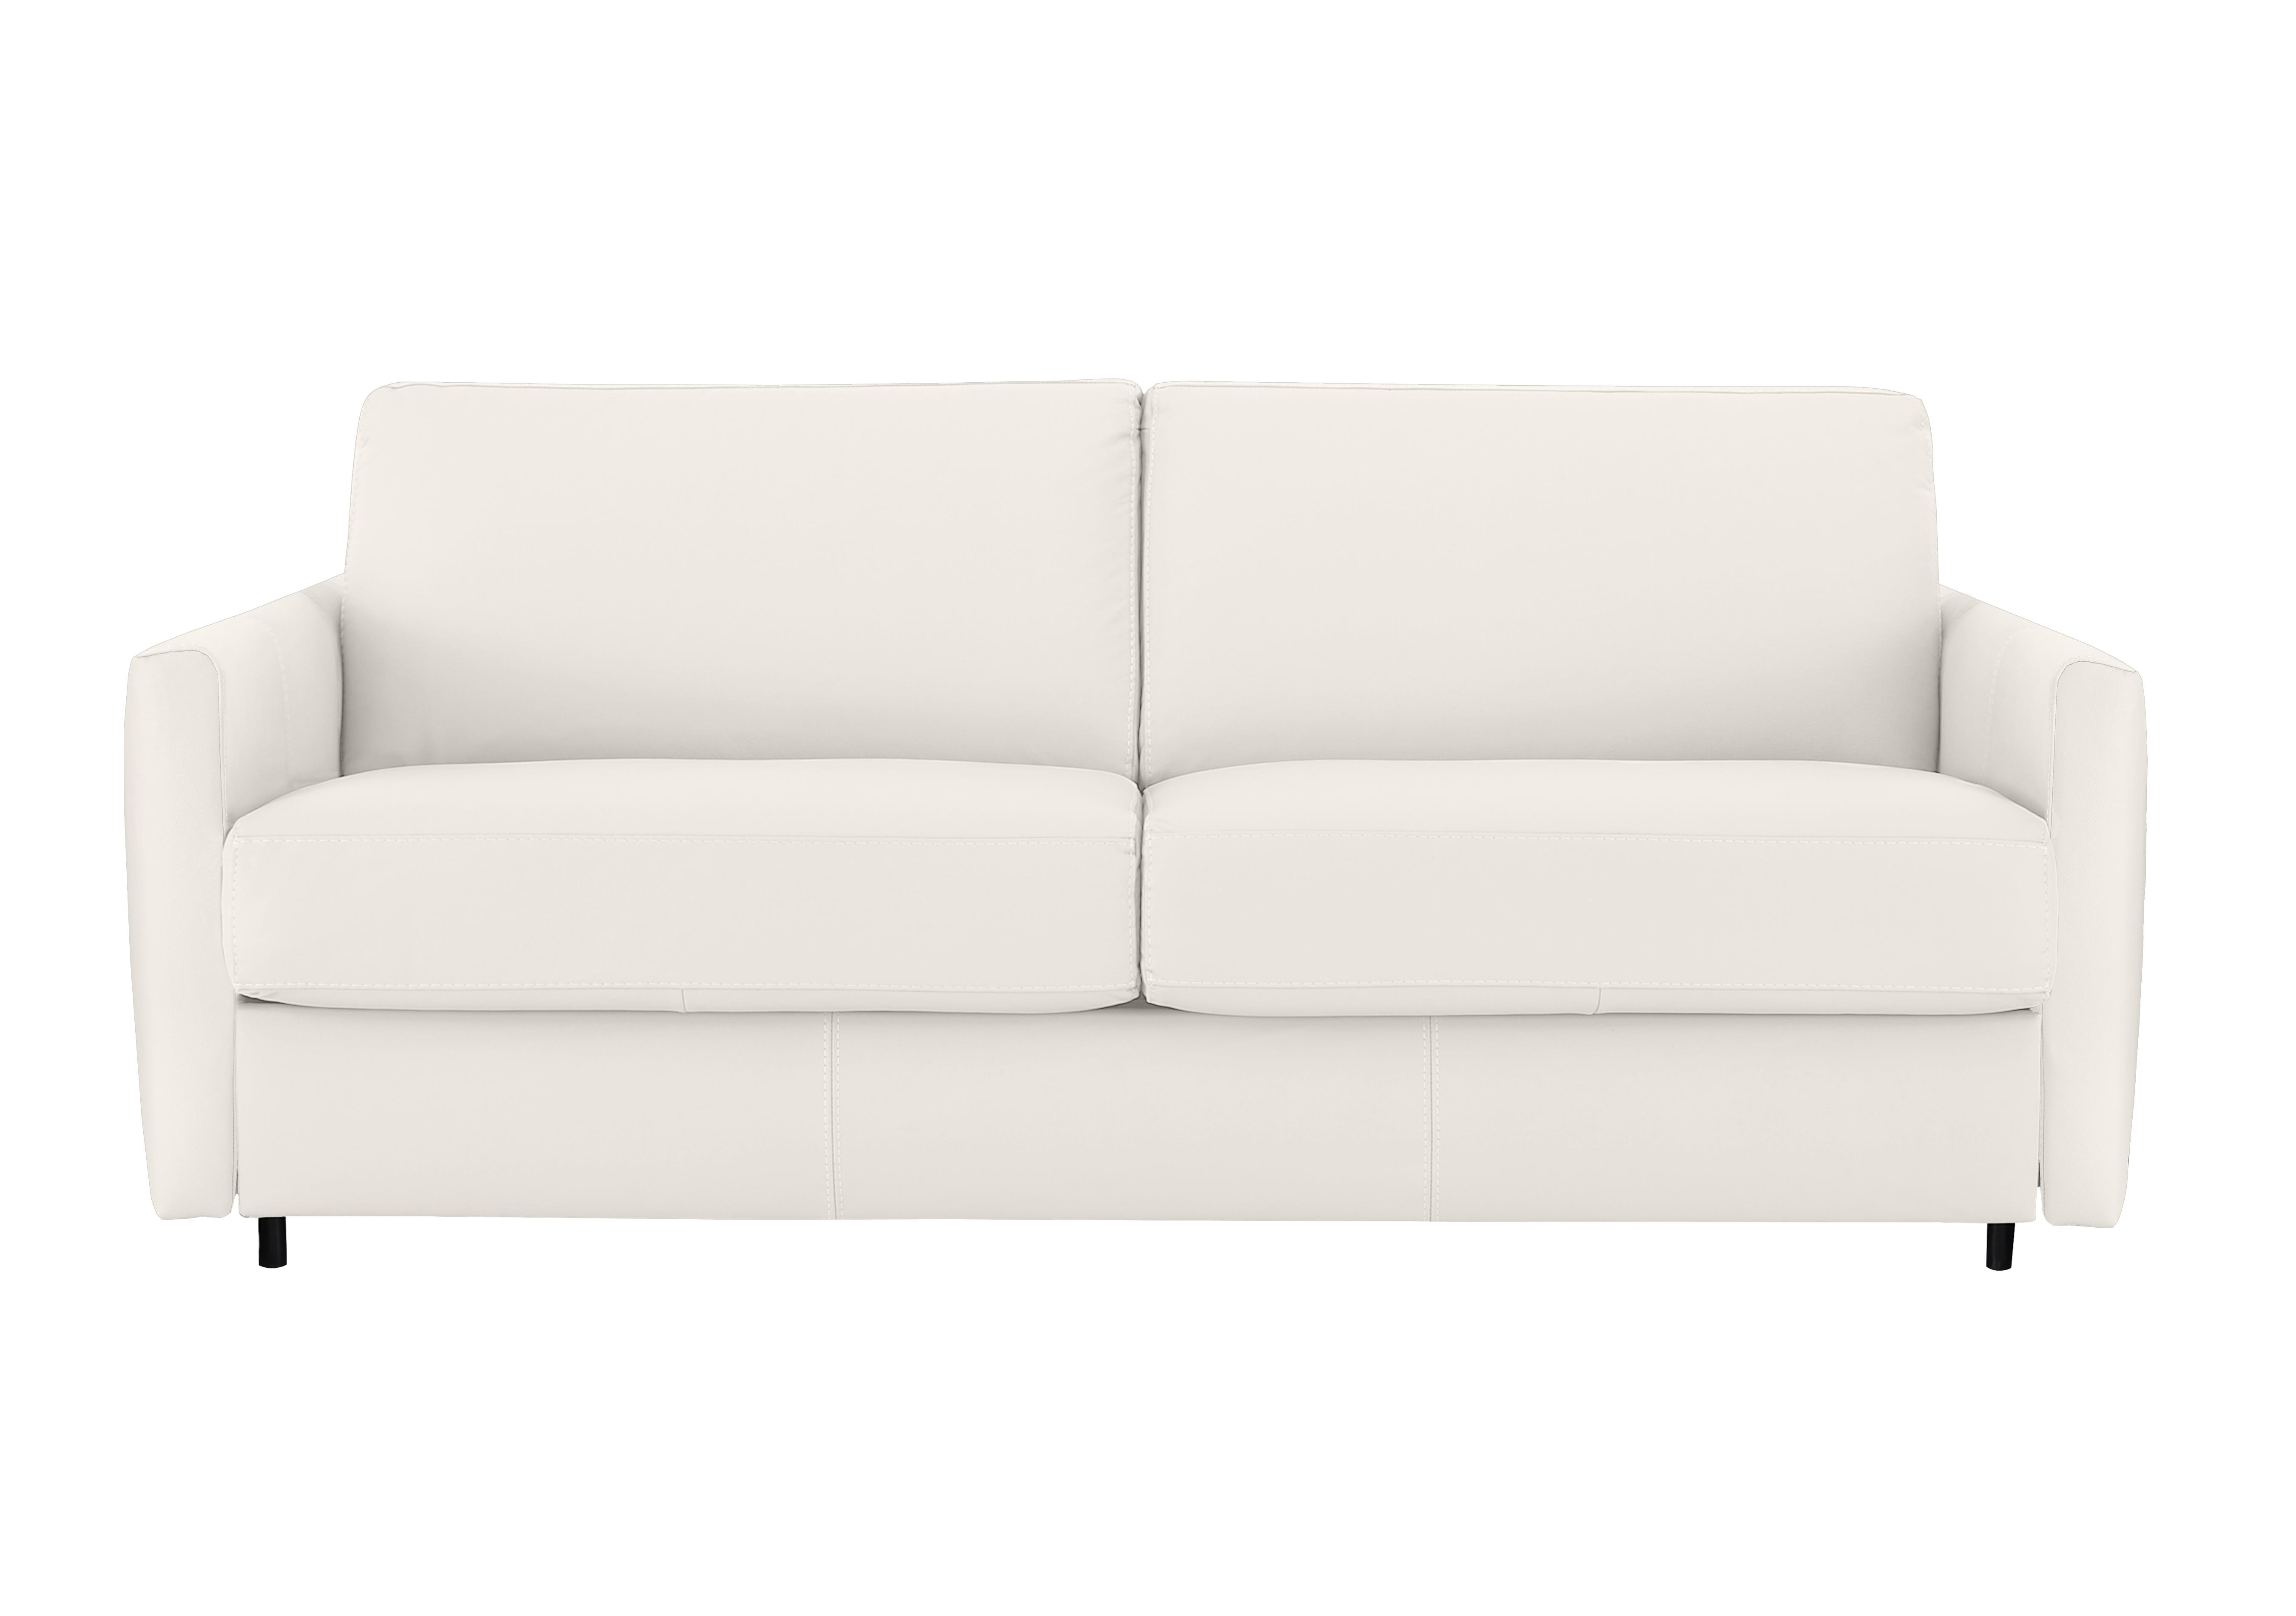 Alcova 3 Seater Leather Sofa Bed with Slim Arms in Torello Bianco 93 on Furniture Village